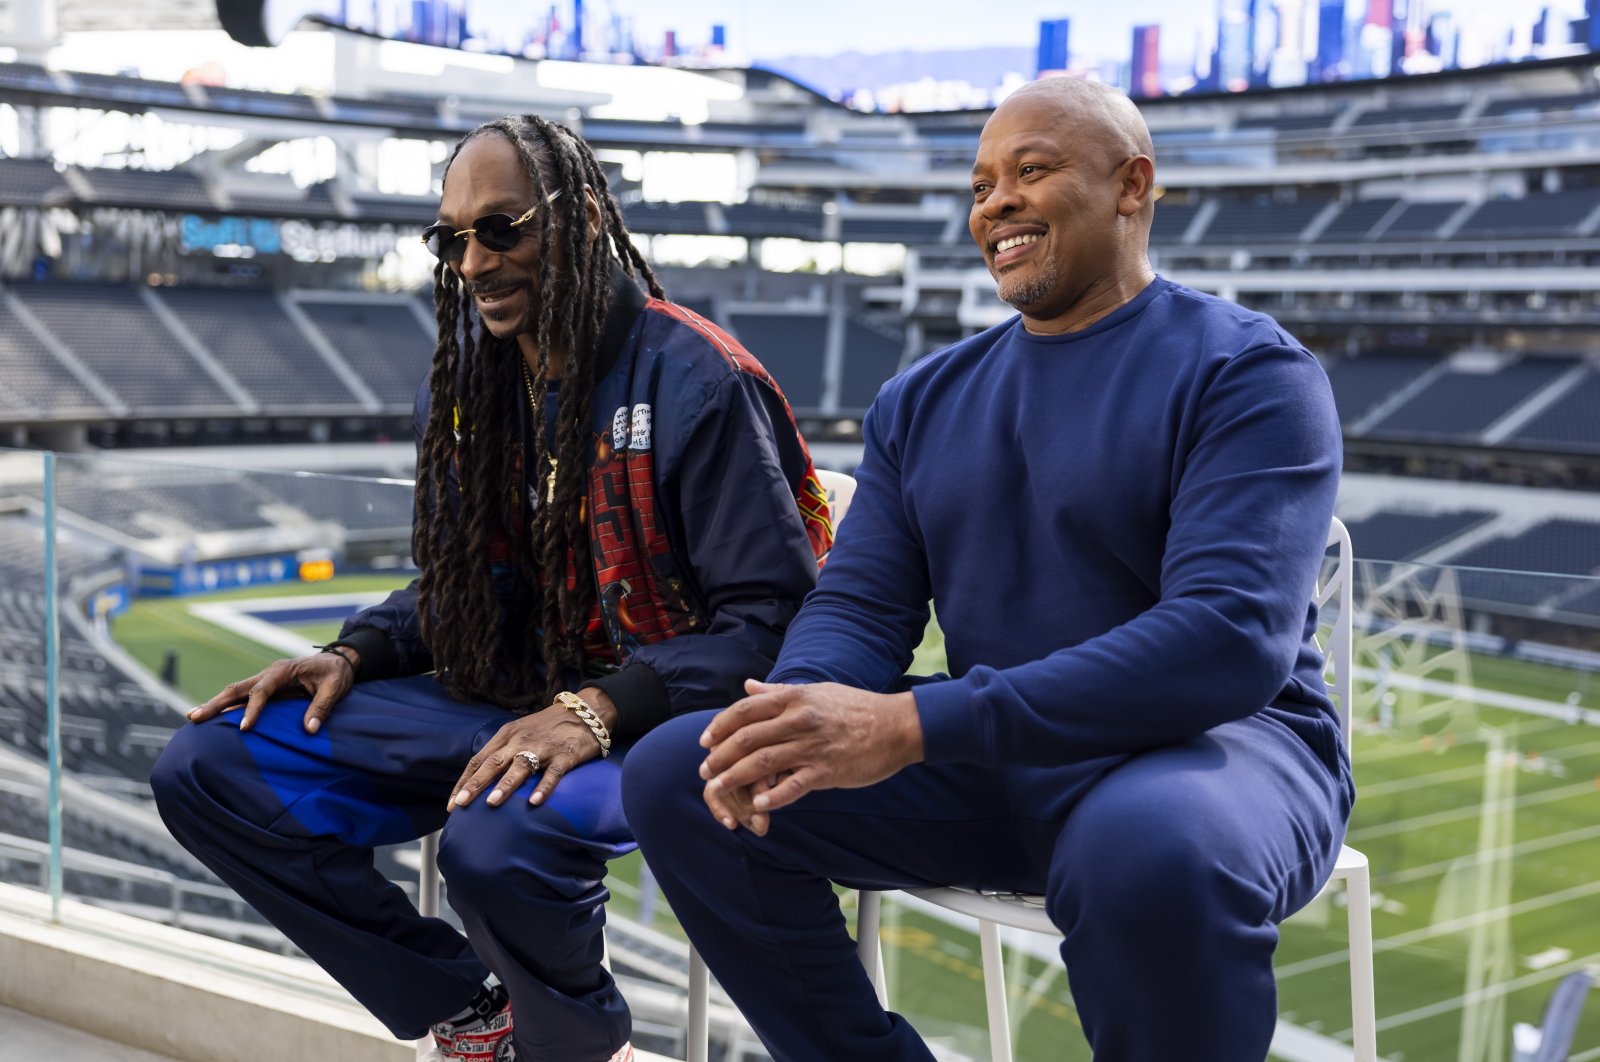 Dr. Dre & Snoop Dogg Are 'Cooking Up' Some New Music Together